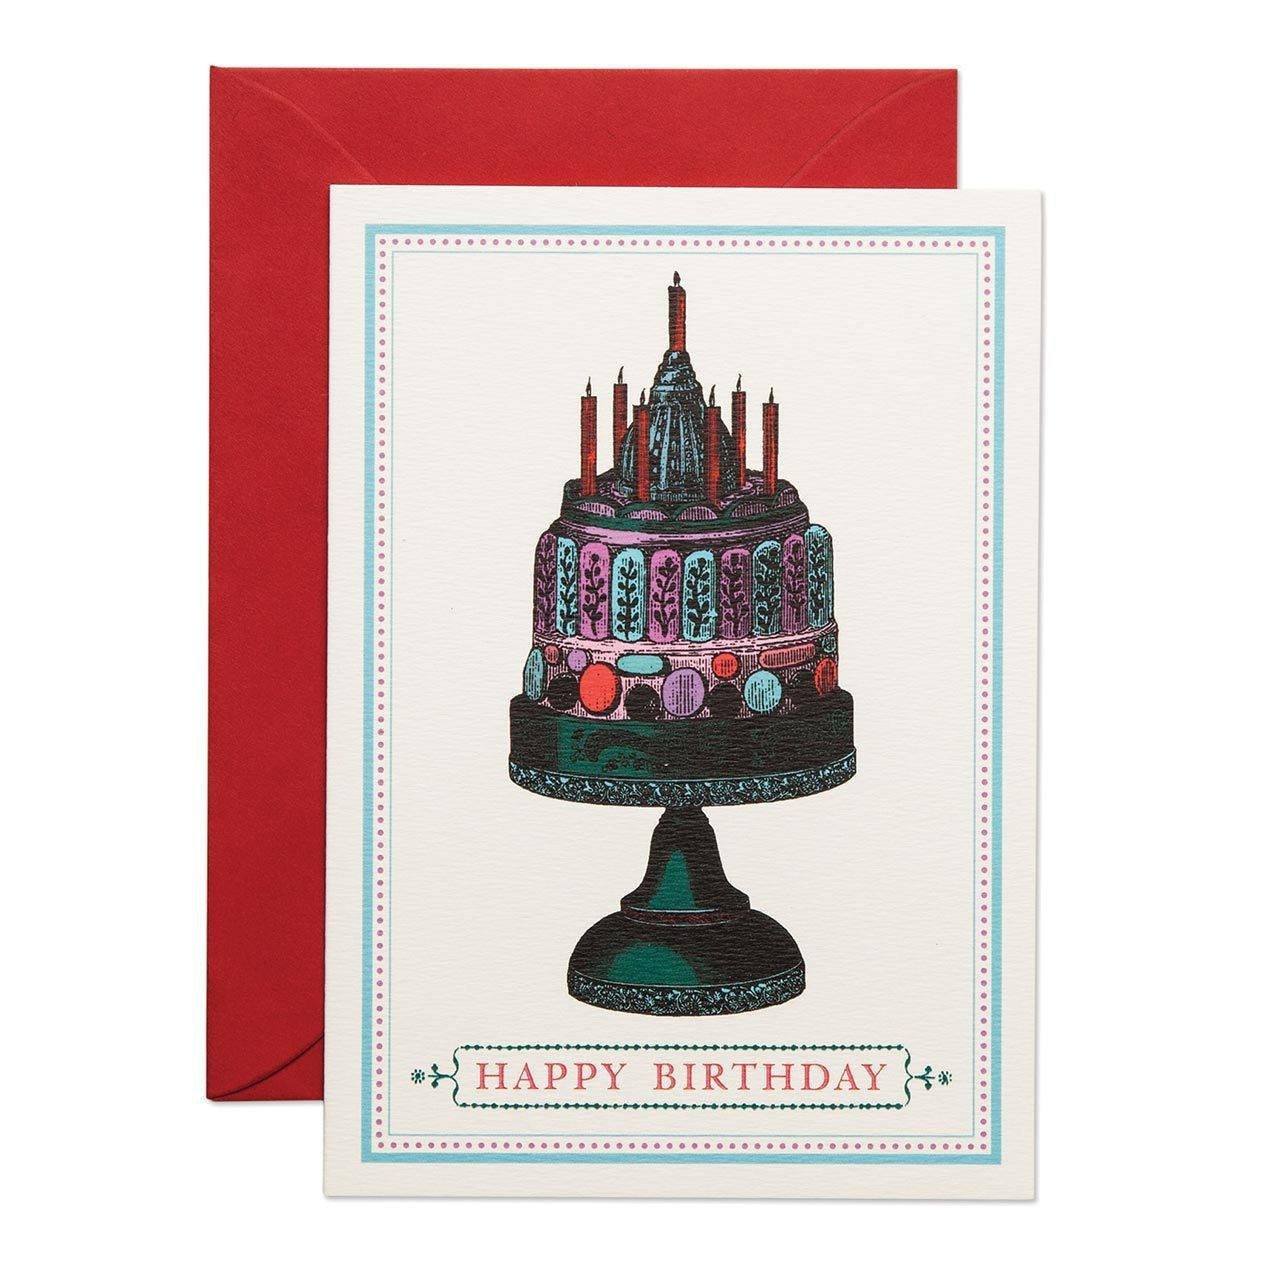 Happy Birthday Cake Greeting Card - Chase and Wonder - Proudly Made in Britain